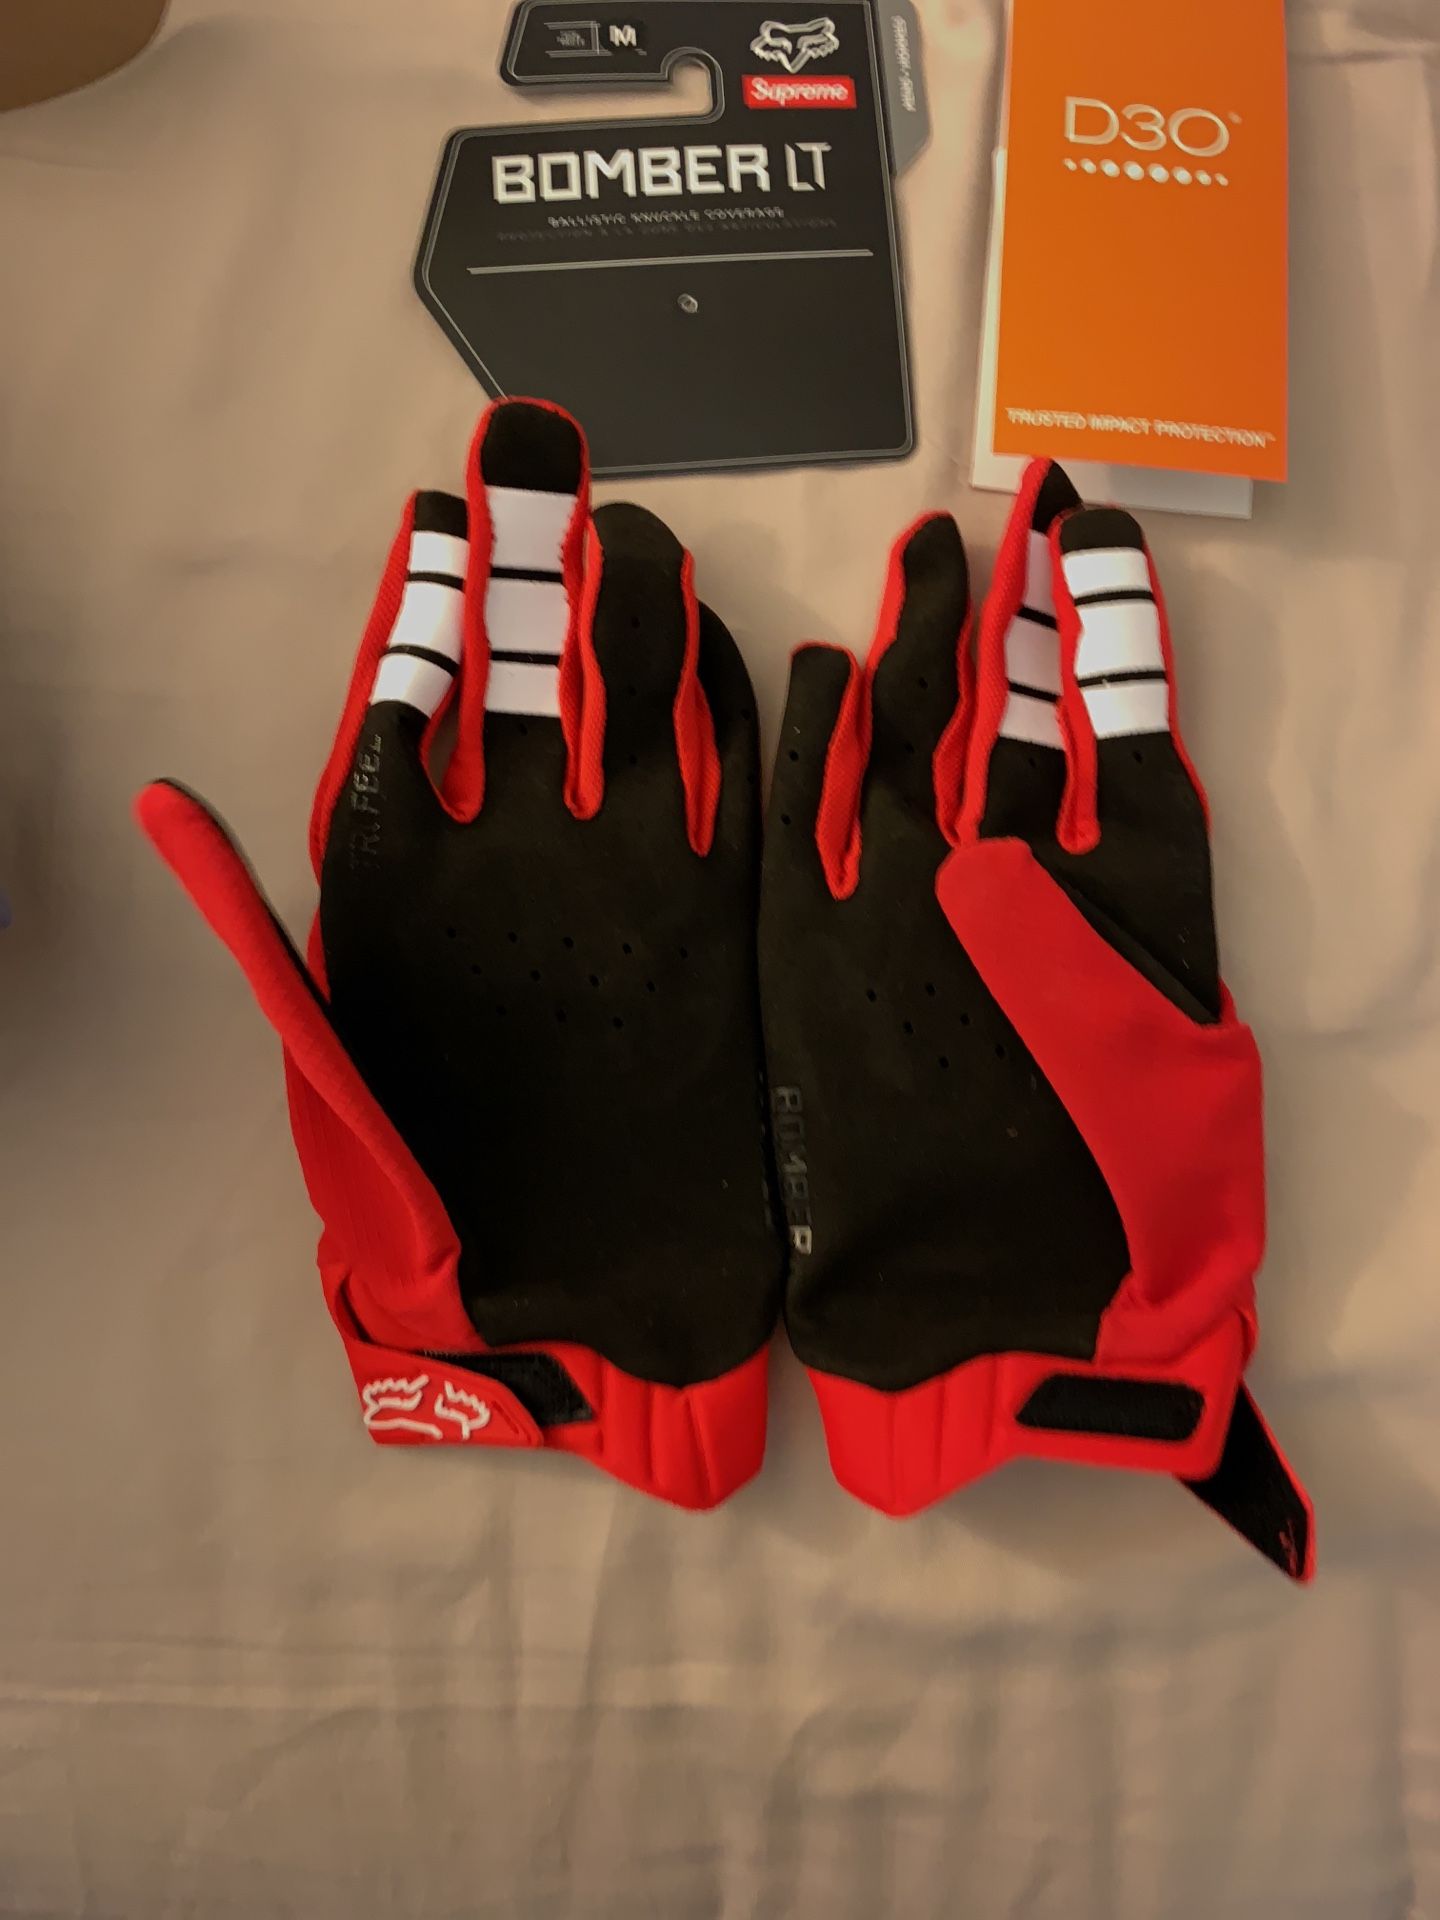 Supreme fox racing red gloves size medium new in plastic for Sale